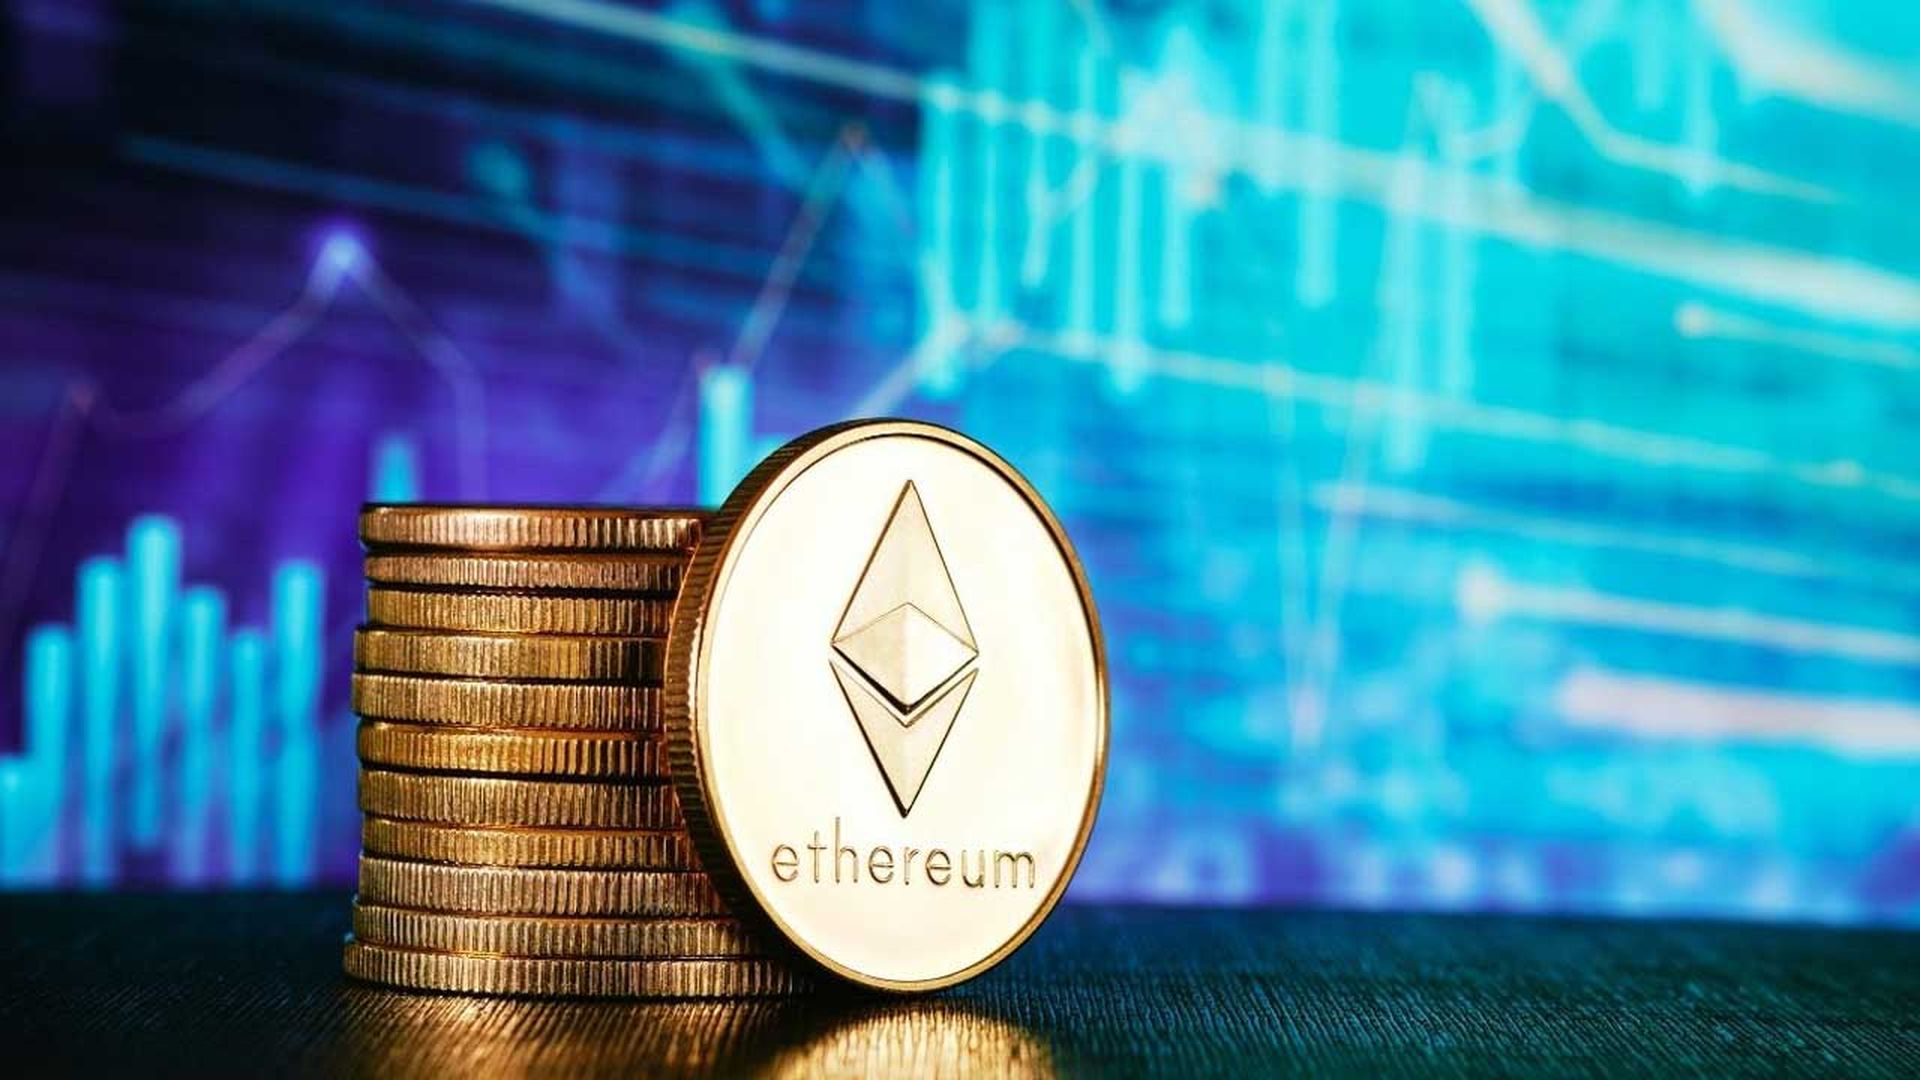 After the huge crypto crash, the Bitcoin price is hovering around 20,000$ while Ether rose in value prior to the Ethereum merge.